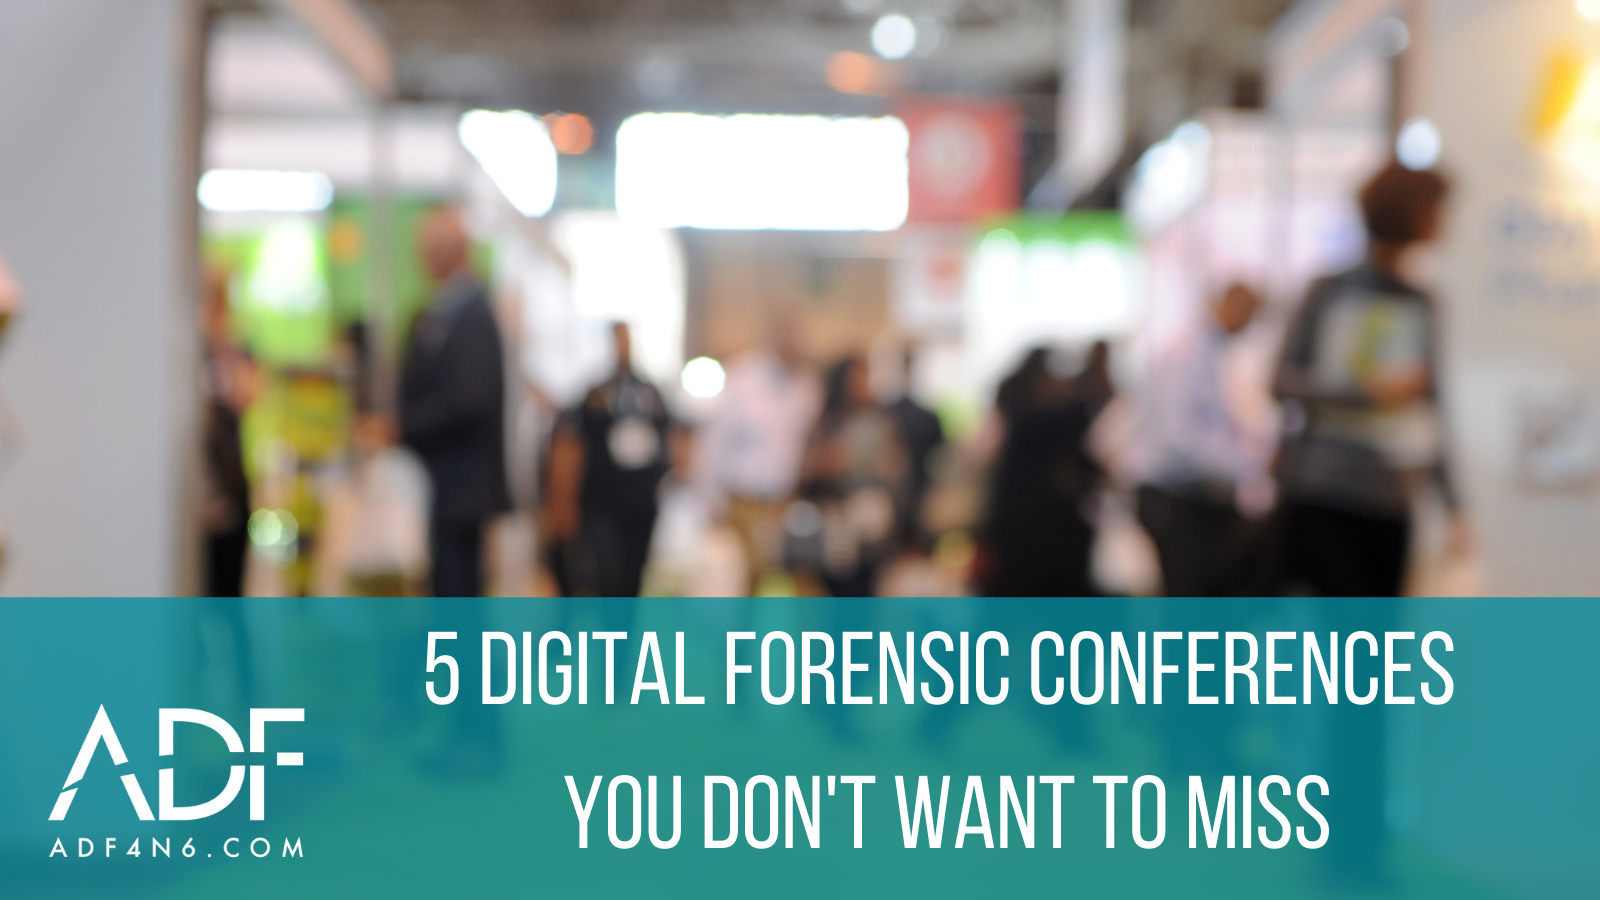 5 Digital Forensic Conferences You Don't Want to Miss